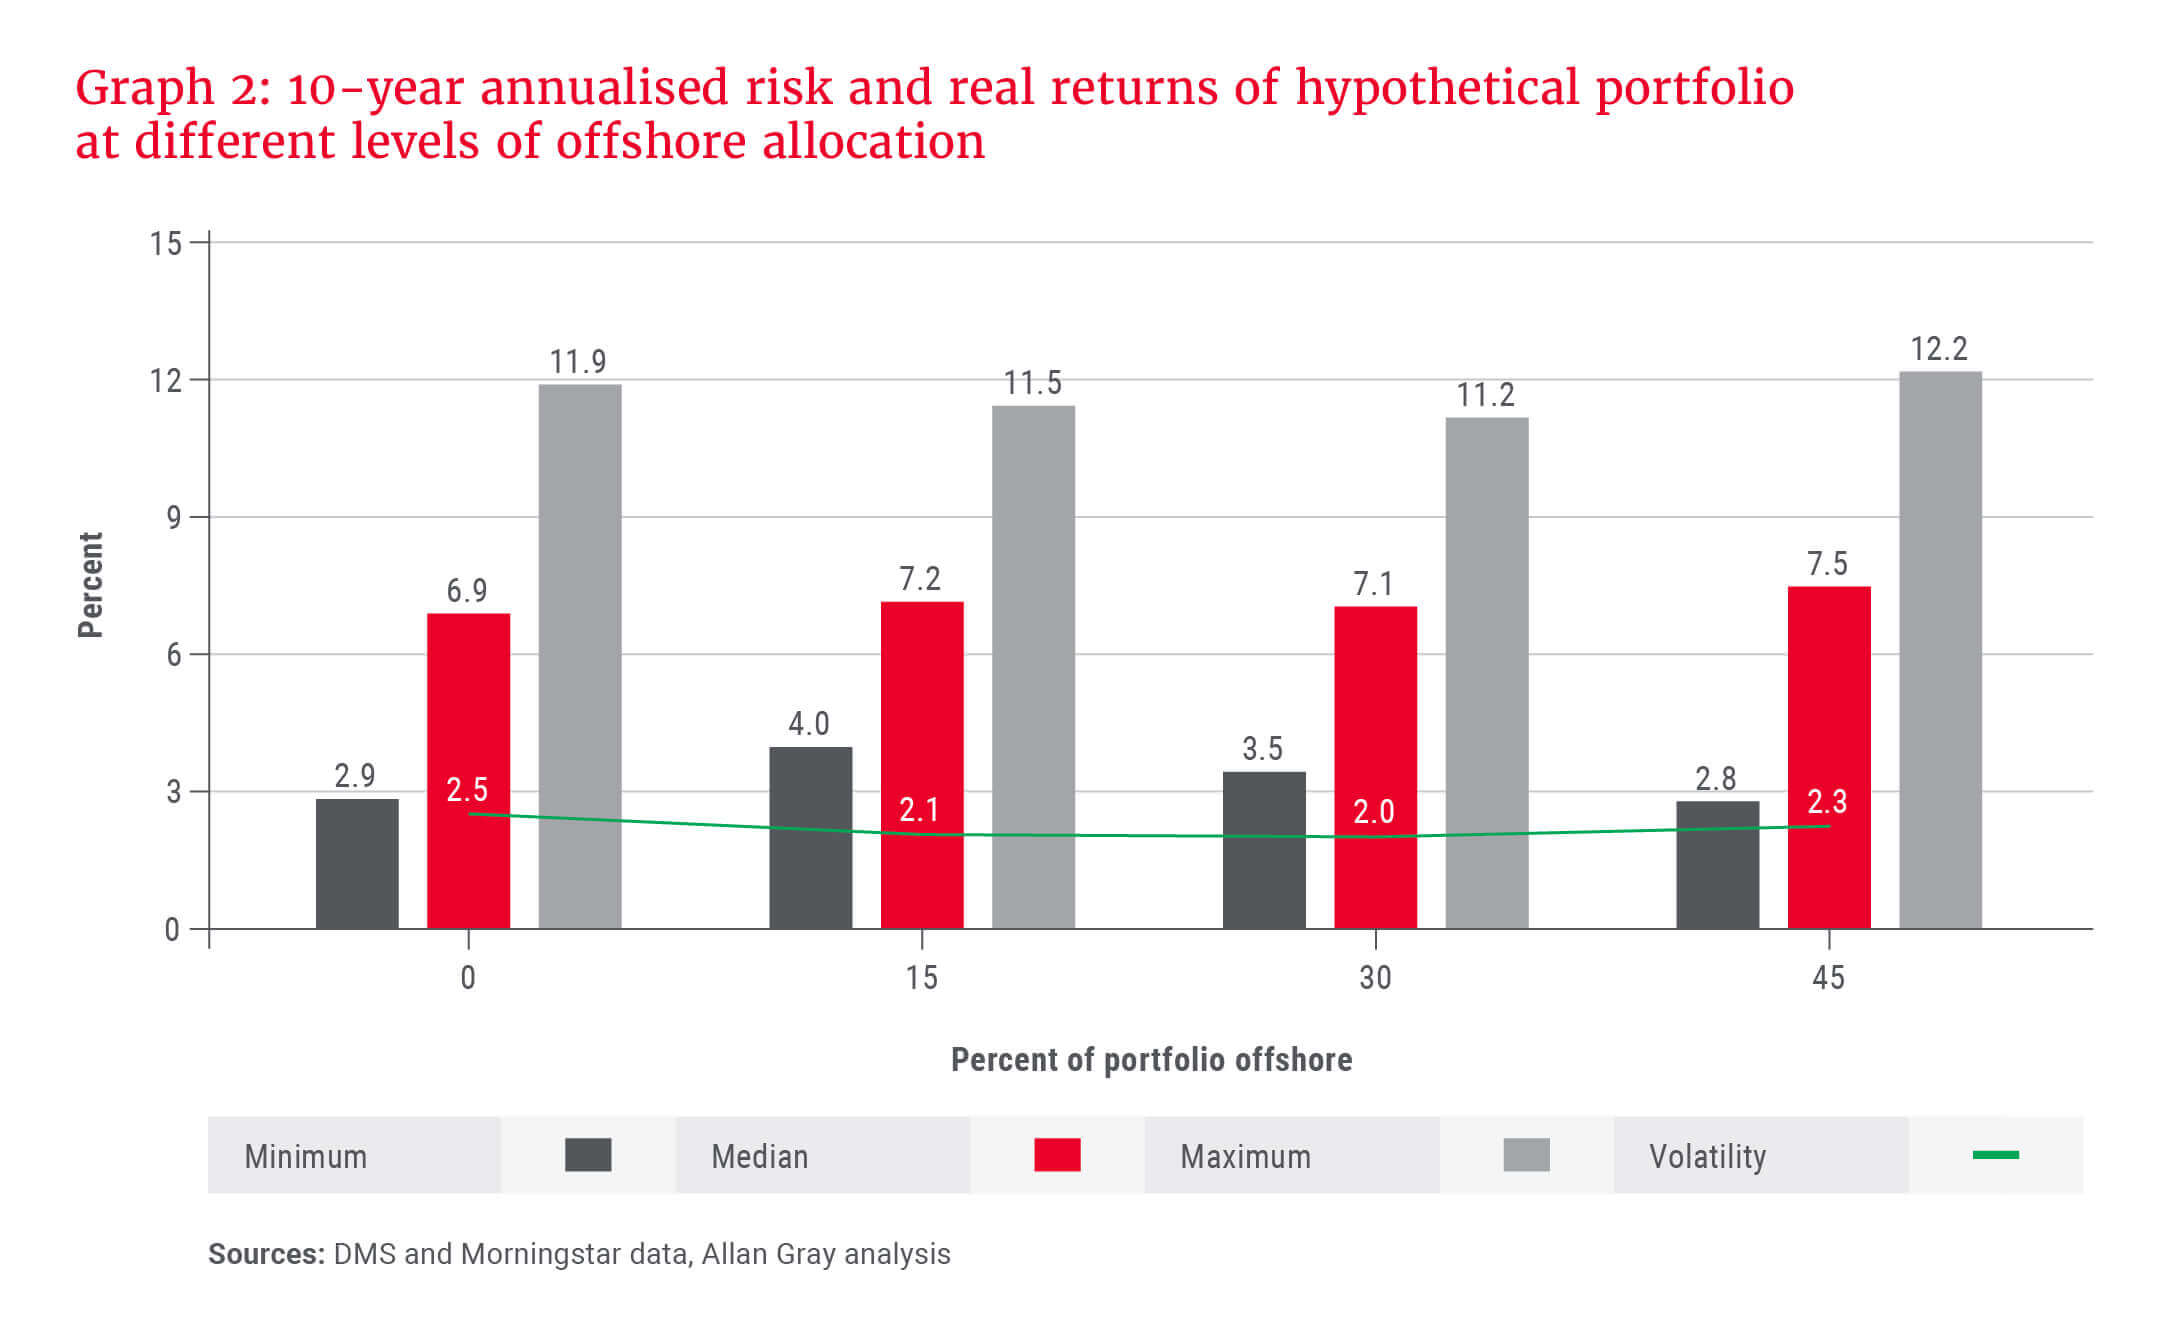 Graph 2_10 year annualised risk and real returns of hypothetical portfolio at different levels of offshore allocation.jpg